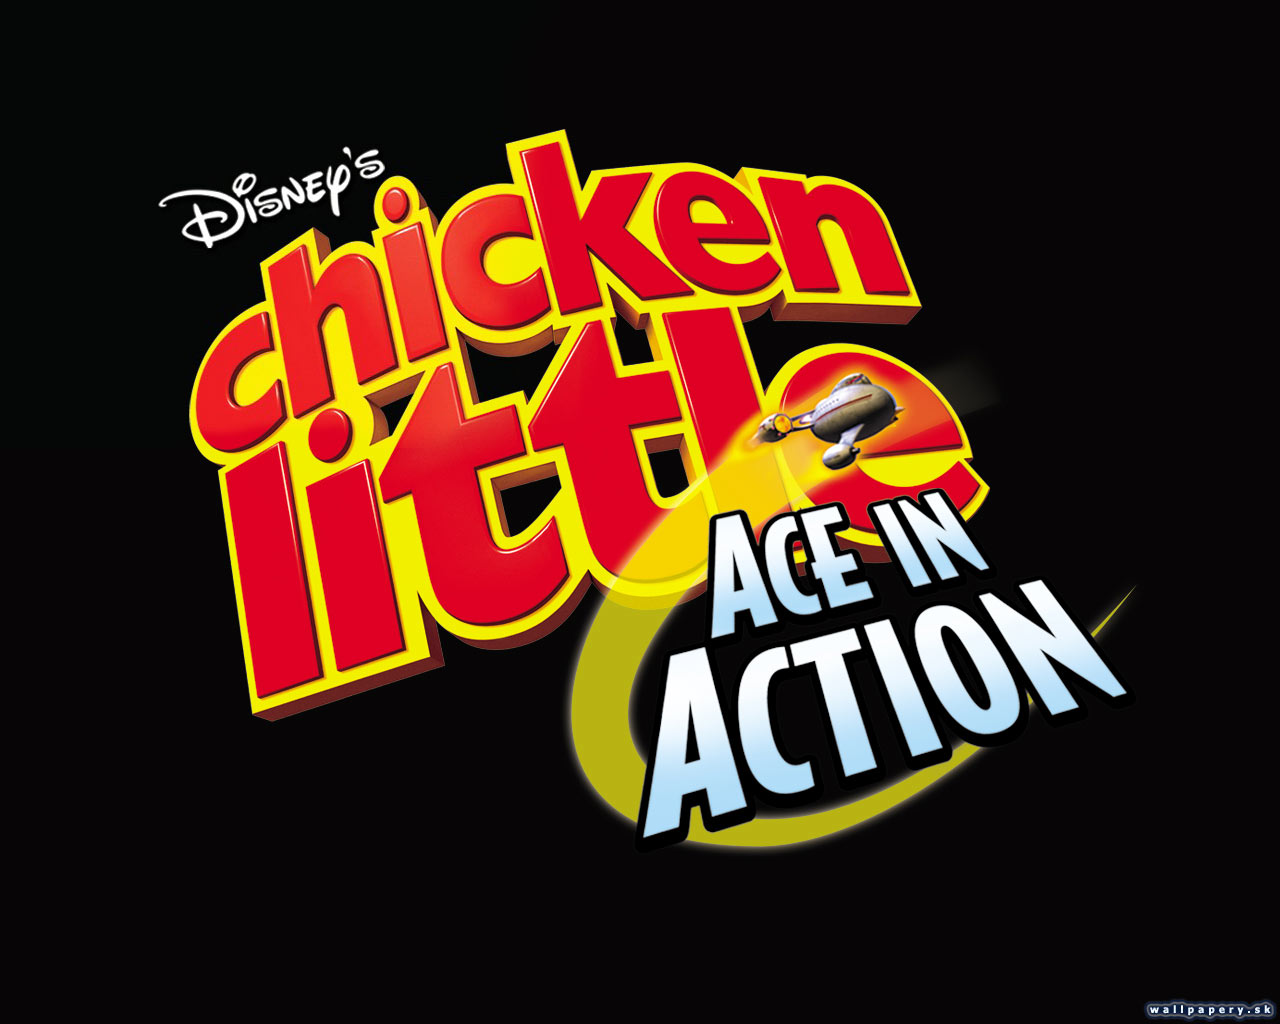 Chicken Little: Ace in Action - wallpaper 2